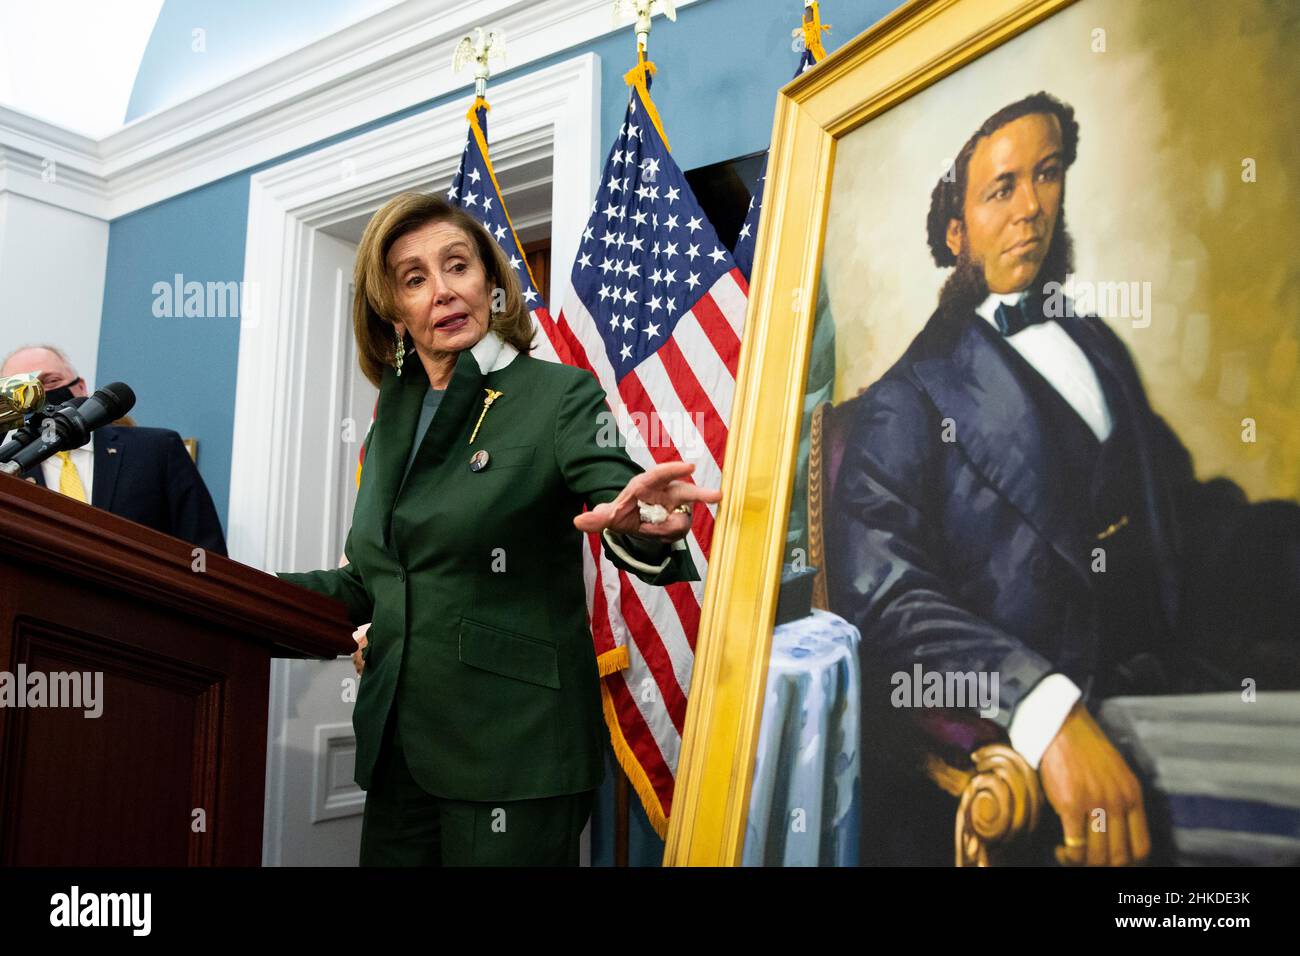 Washington, USA. 03rd Feb, 2022. United States Speaker of the House Nancy Pelosi gestures beside a portrait of Joseph H. Rainey, during an unveiling ceremony for the Joseph H. Rainey Room, on Capitol Hill in Washington, DC, USA, 03 February 2022. Rainey was the first black person to serve in the United States House of Representatives. (Photo by Pool/Sipa USA) Credit: Sipa USA/Alamy Live News Stock Photo